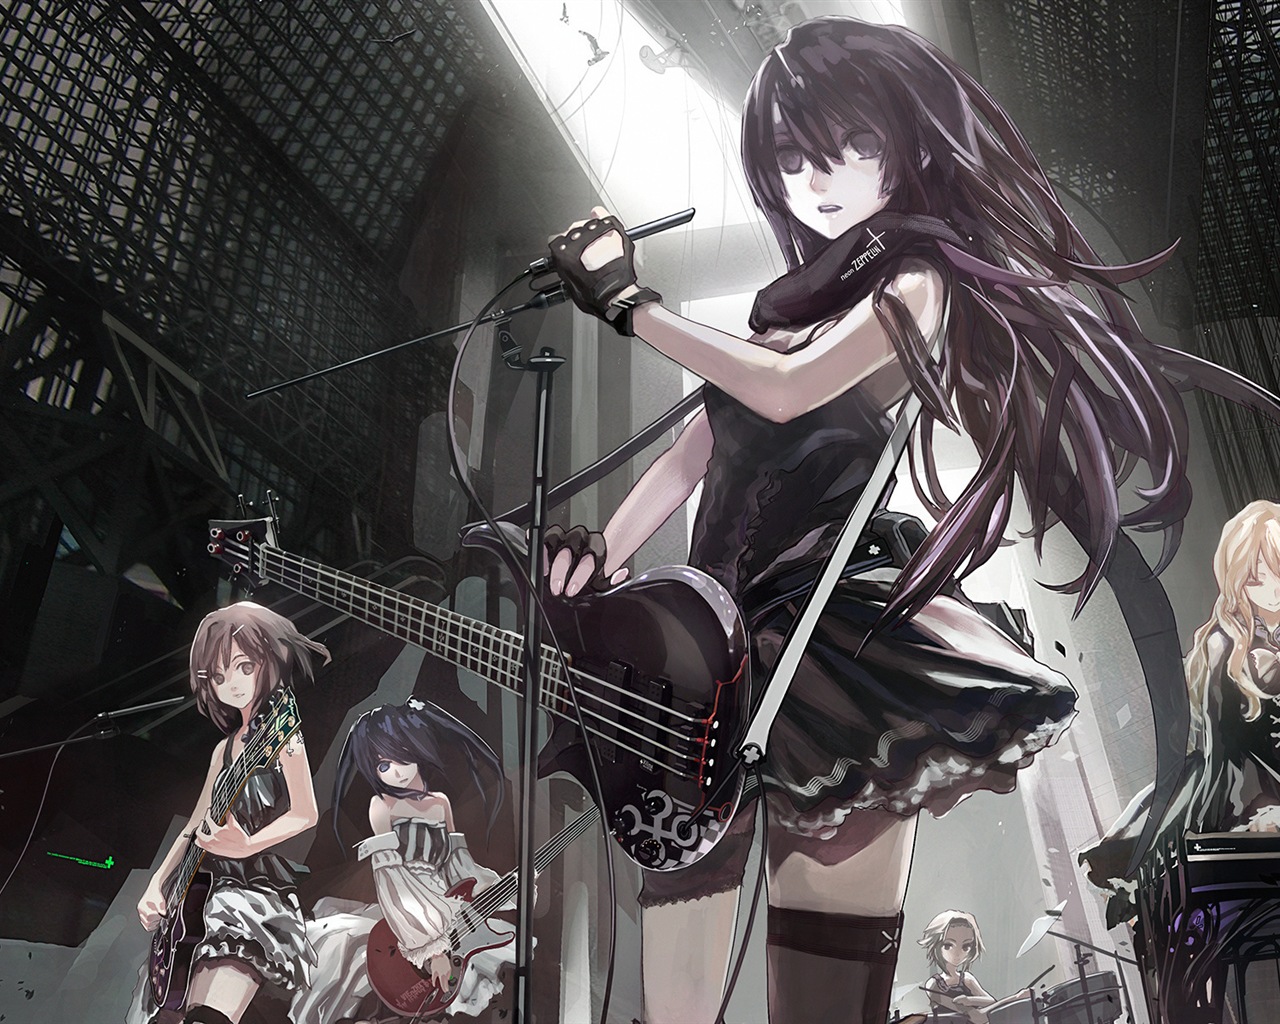 Musique guitare anime girl wallpapers HD #7 - 1280x1024